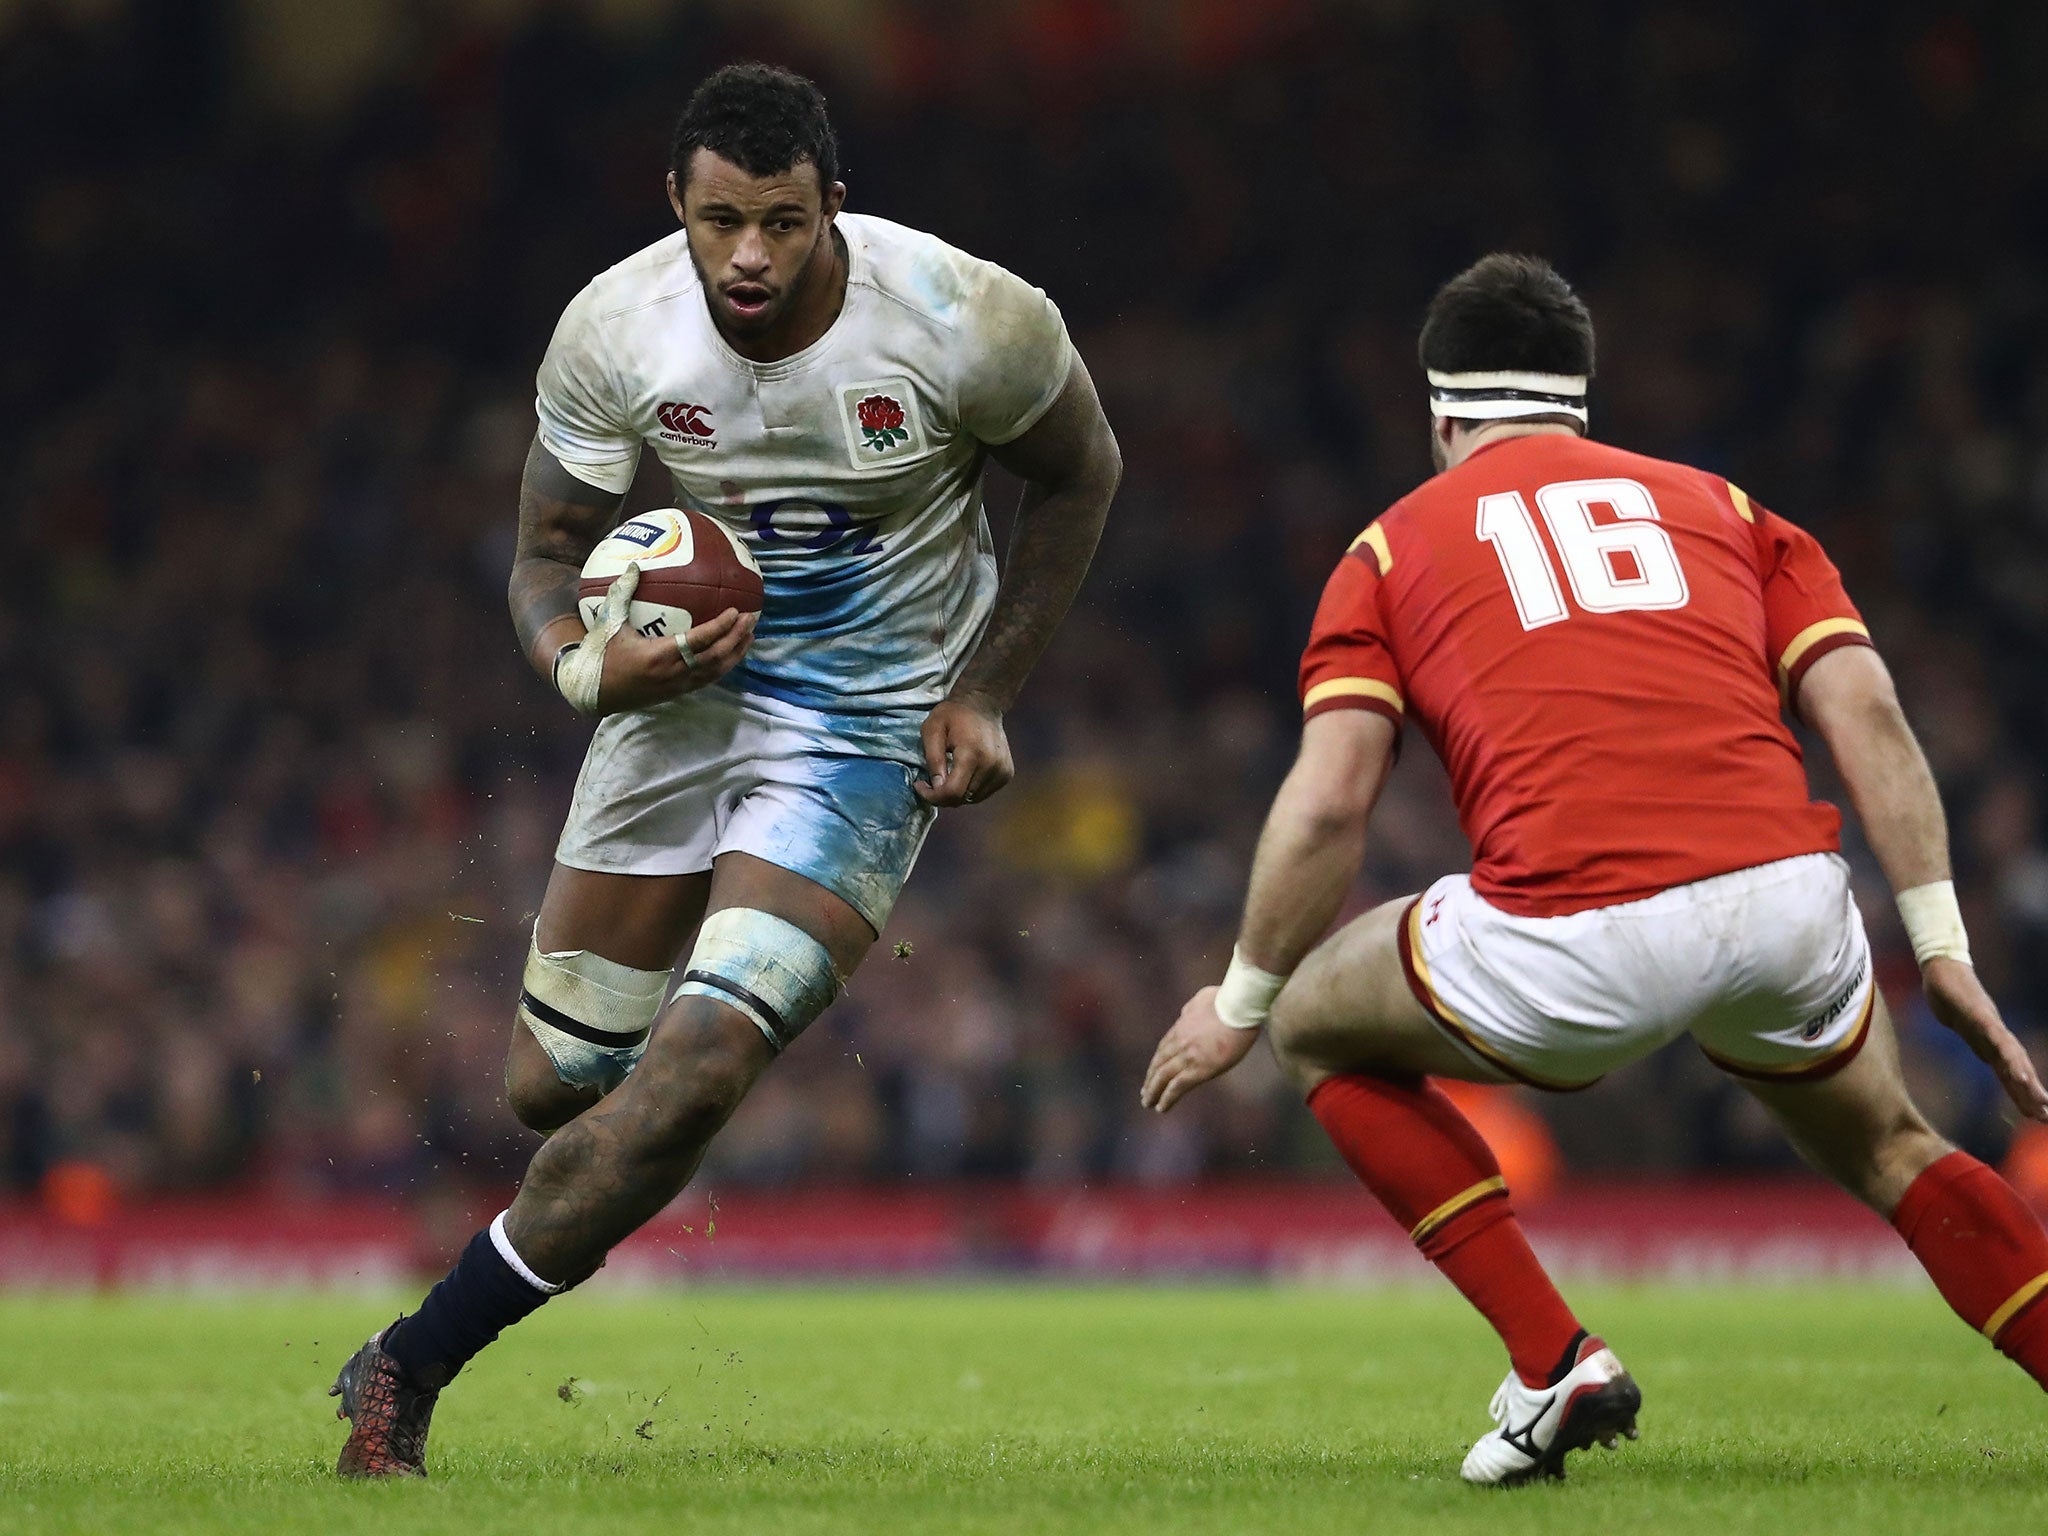 Courtney Lawes believes he's playing the best rugby of his life after changing his game